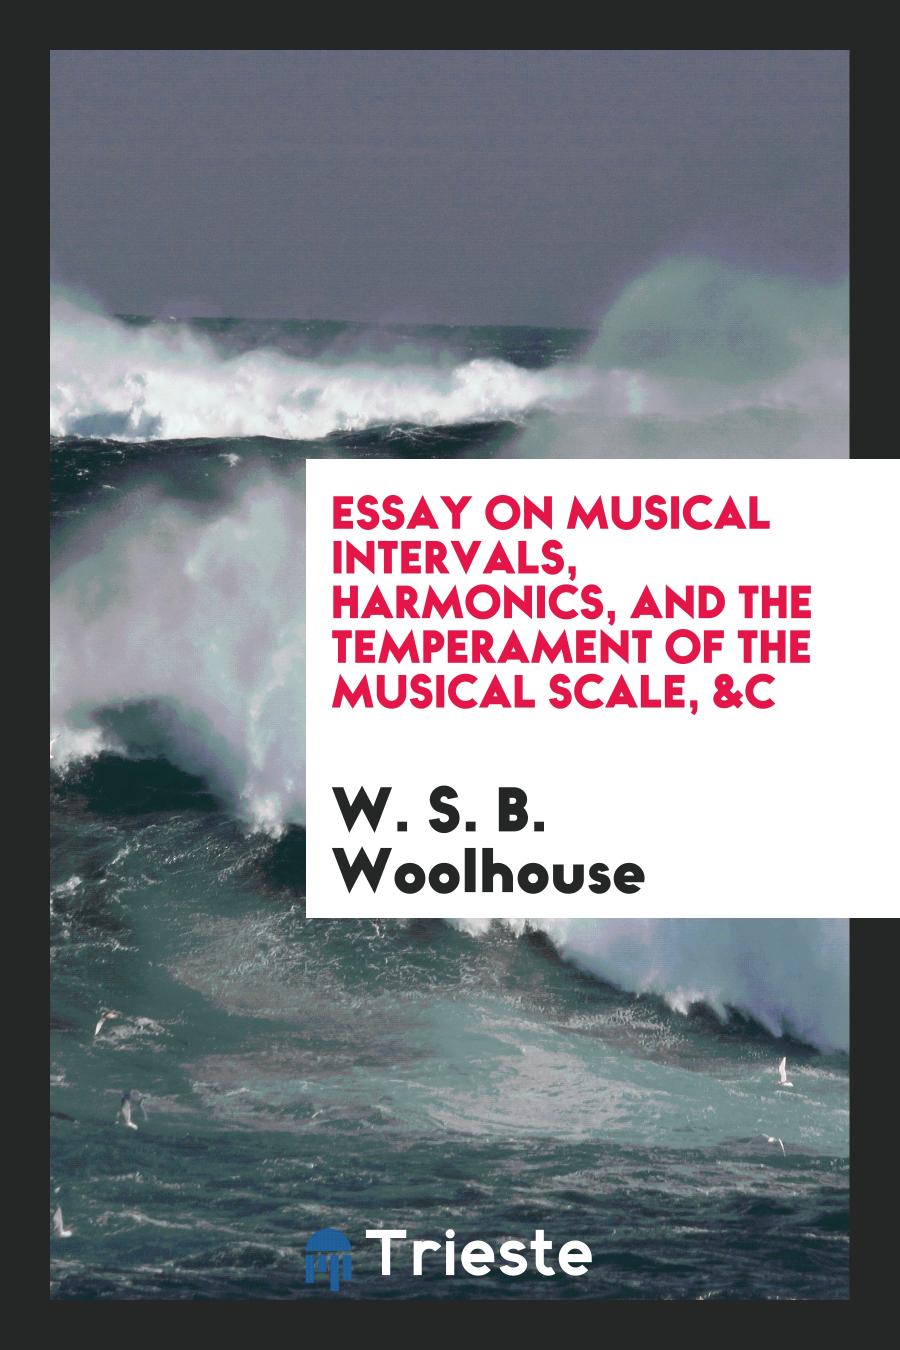 Essay on Musical Intervals, Harmonics, and the Temperament of the Musical Scale, &c